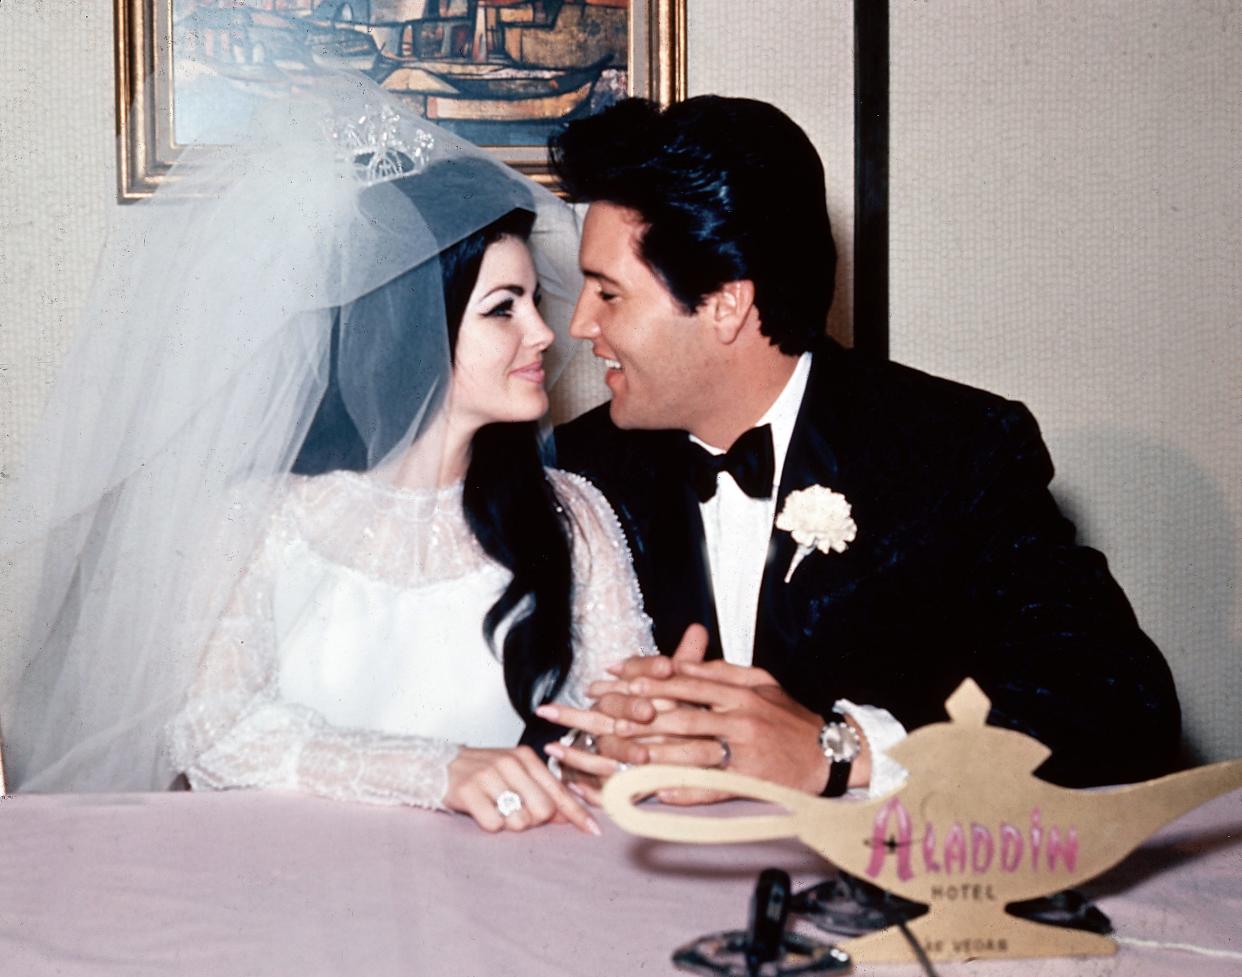 Priscilla and Elvis Presley at the Aladdin Hotel in Las Vegas after their wedding on May 1, 1967.